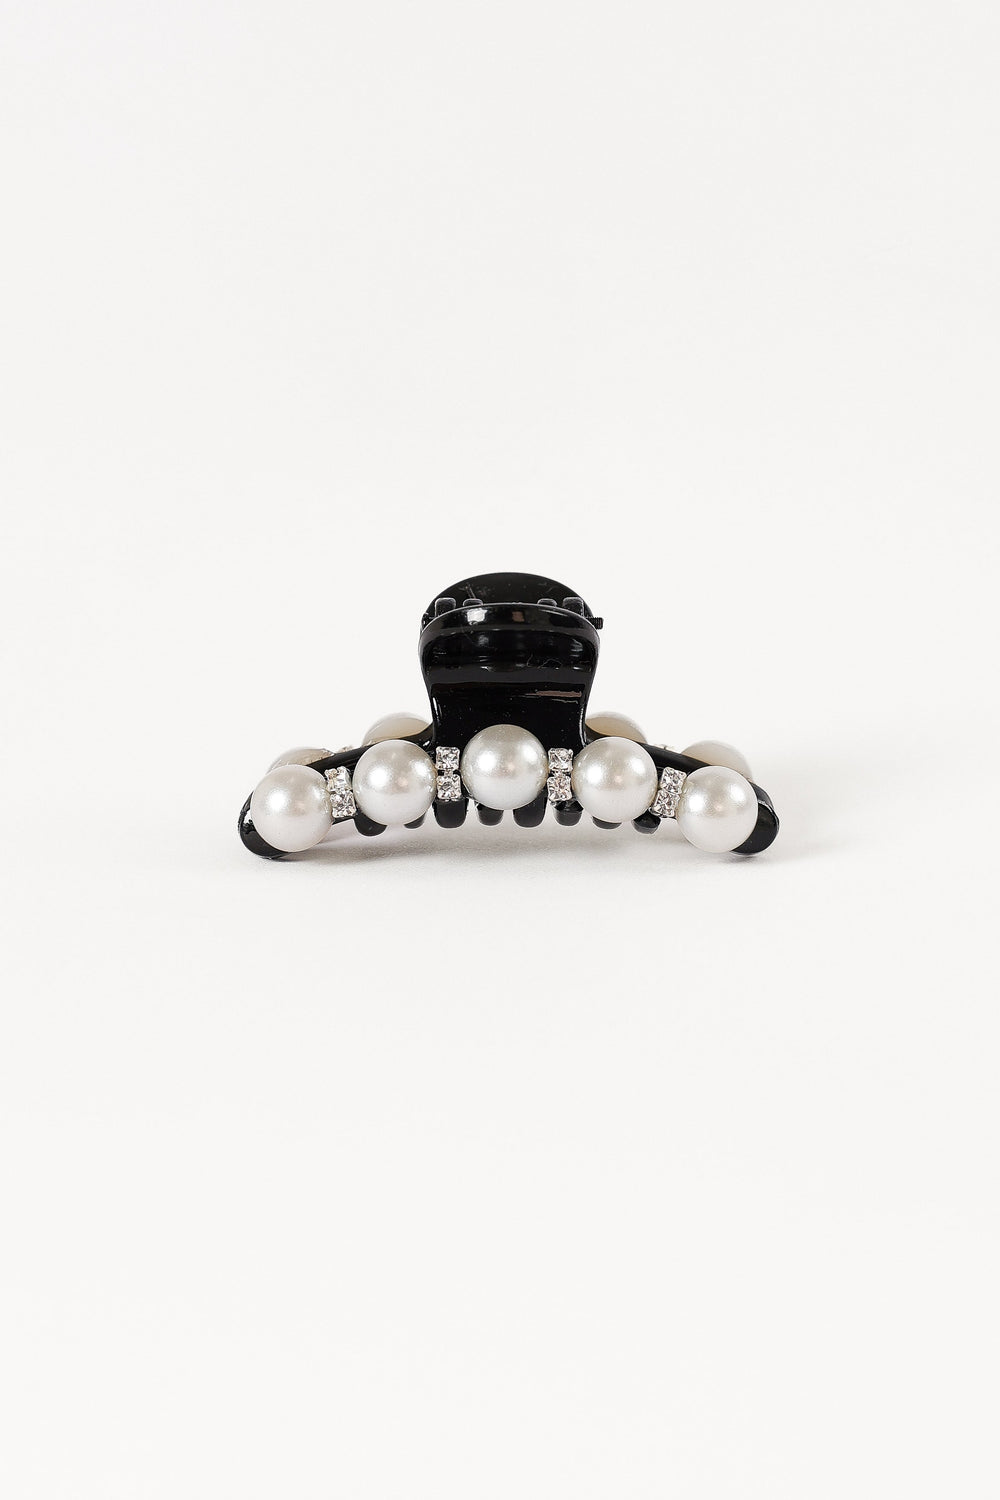 Petal and Pup USA ACCESSORIES Lile Pearl Hair Clip - Black One Size